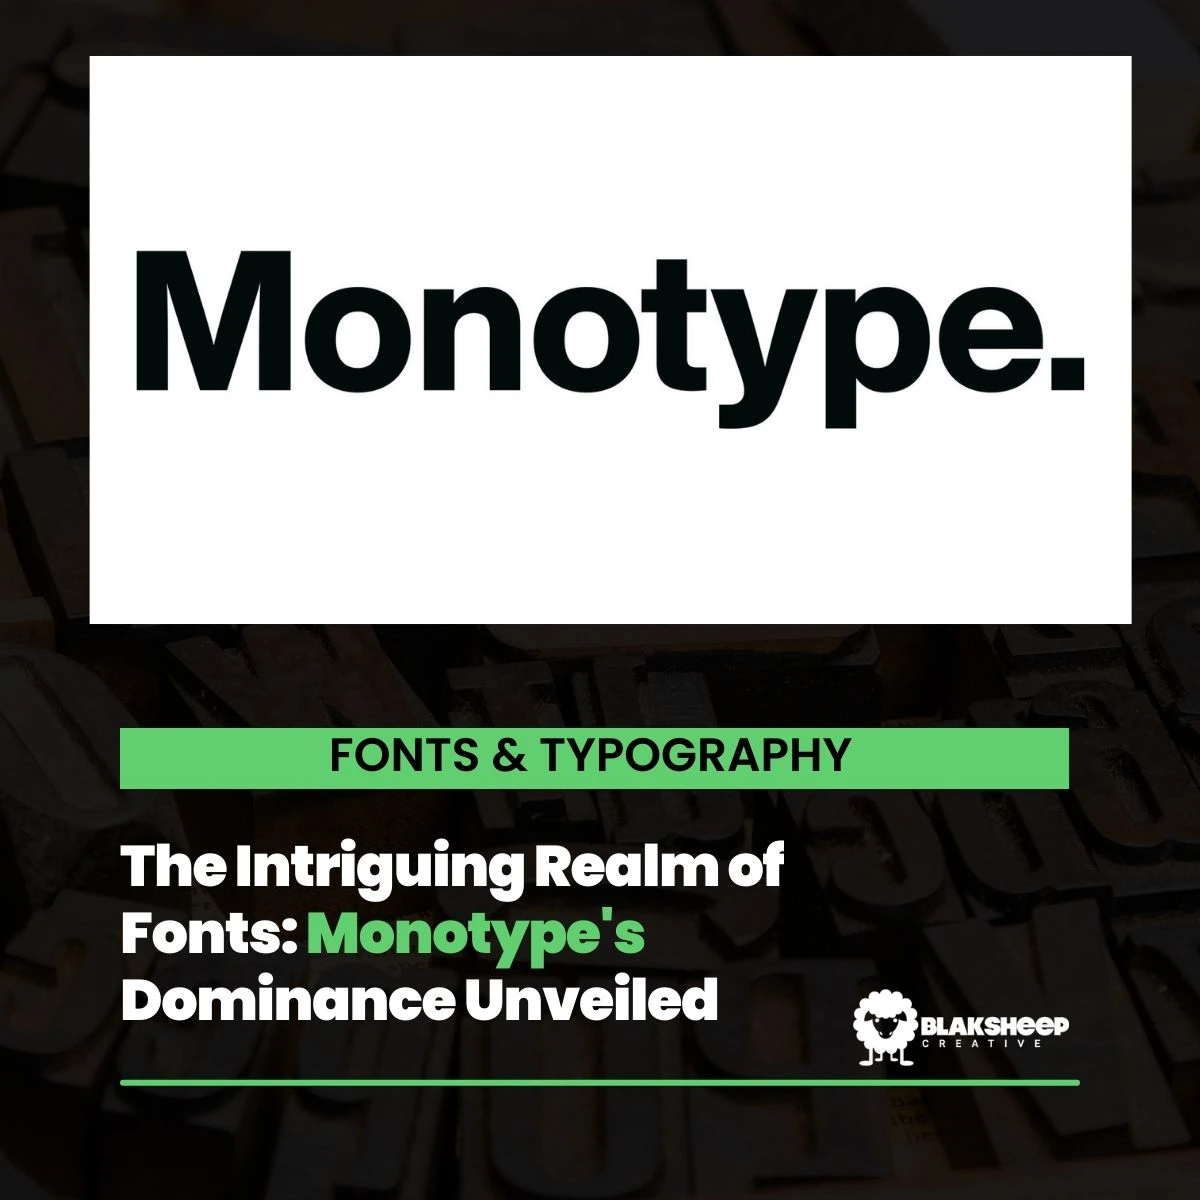 monotype logo with text fonts & typography followed by the intriguing realm of fonts monotype's dominance unveiled and blacksheep creative logo